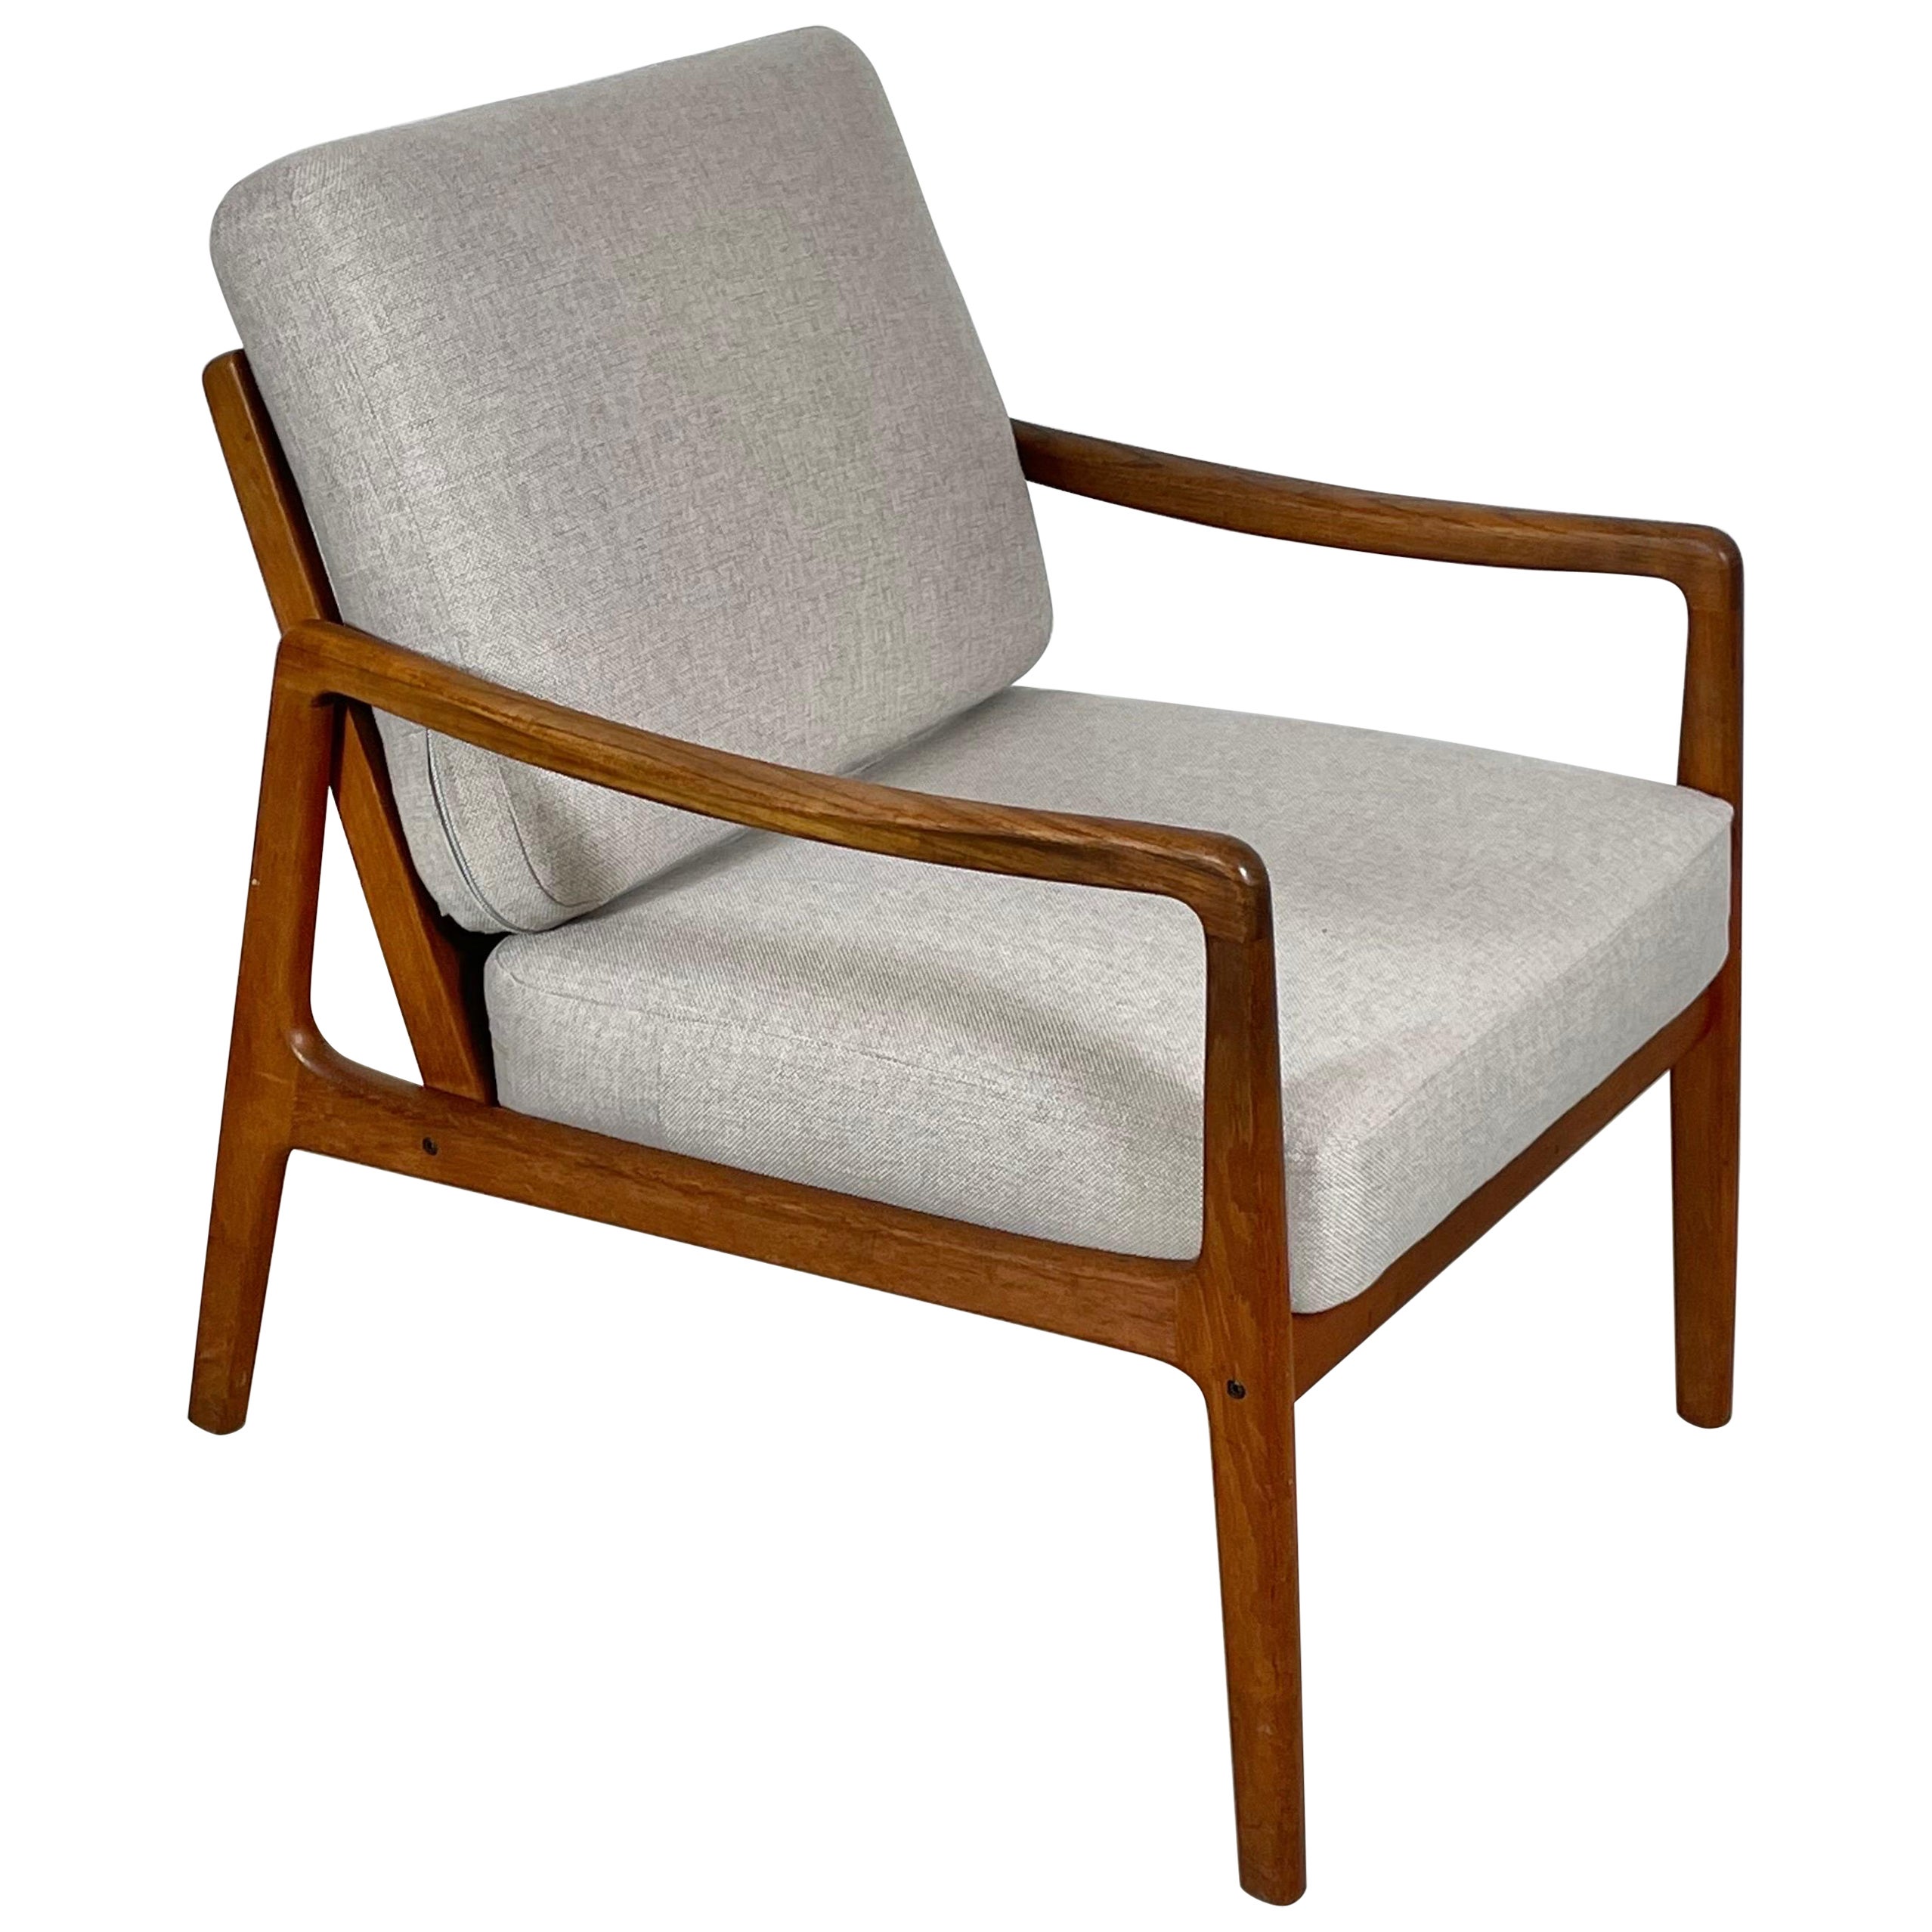 Danish Teak Easy Chair by Ole Wanscher, 1950s For Sale